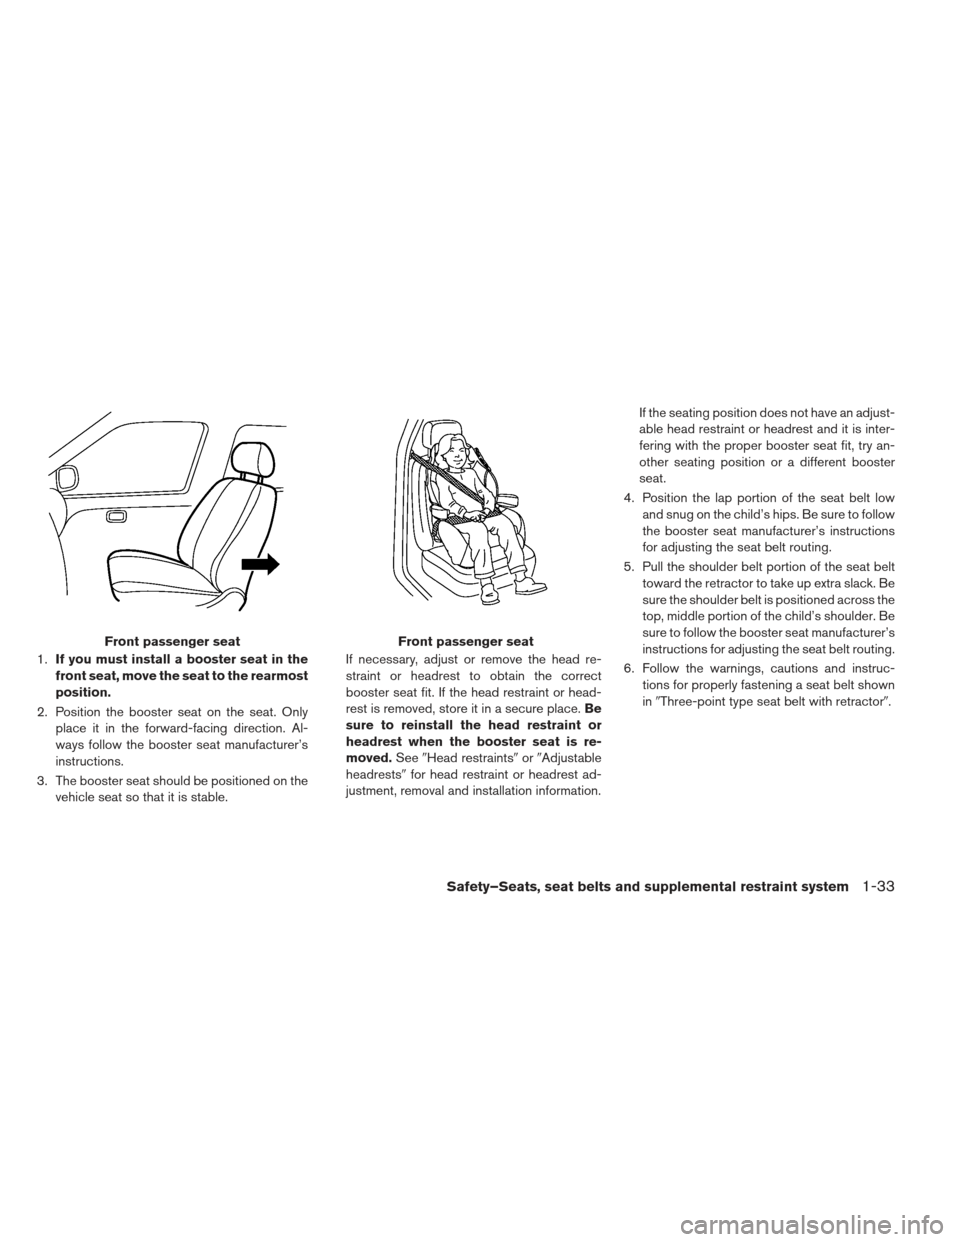 NISSAN LEAF 2013 1.G Owners Manual 1.If you must install a booster seat in the
front seat, move the seat to the rearmost
position.
2. Position the booster seat on the seat. Only place it in the forward-facing direction. Al-
ways follow